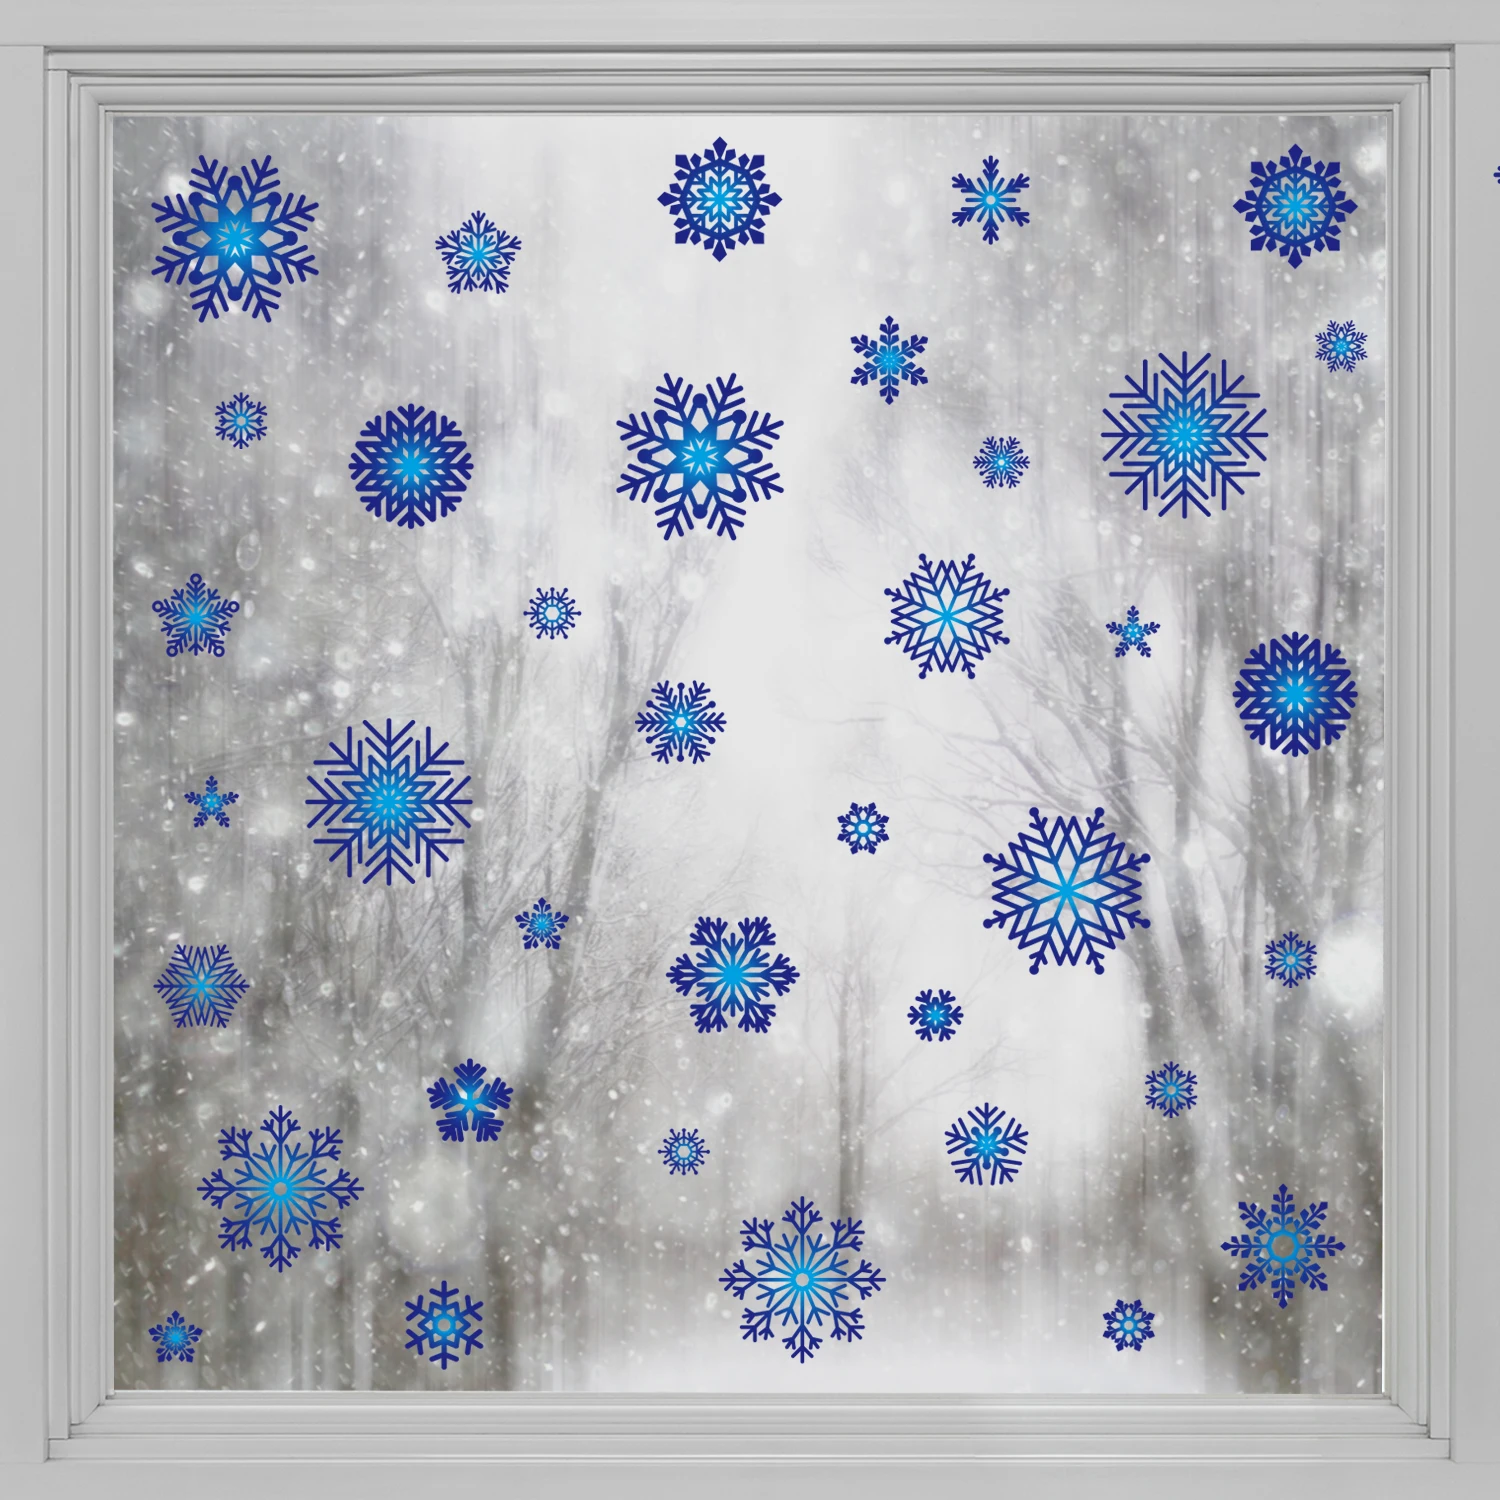 

Kizcozy Creative Blue Snowflakes Christmas Window Film Decorative Double Side Thickened Static Cling Reusable Window Stickers